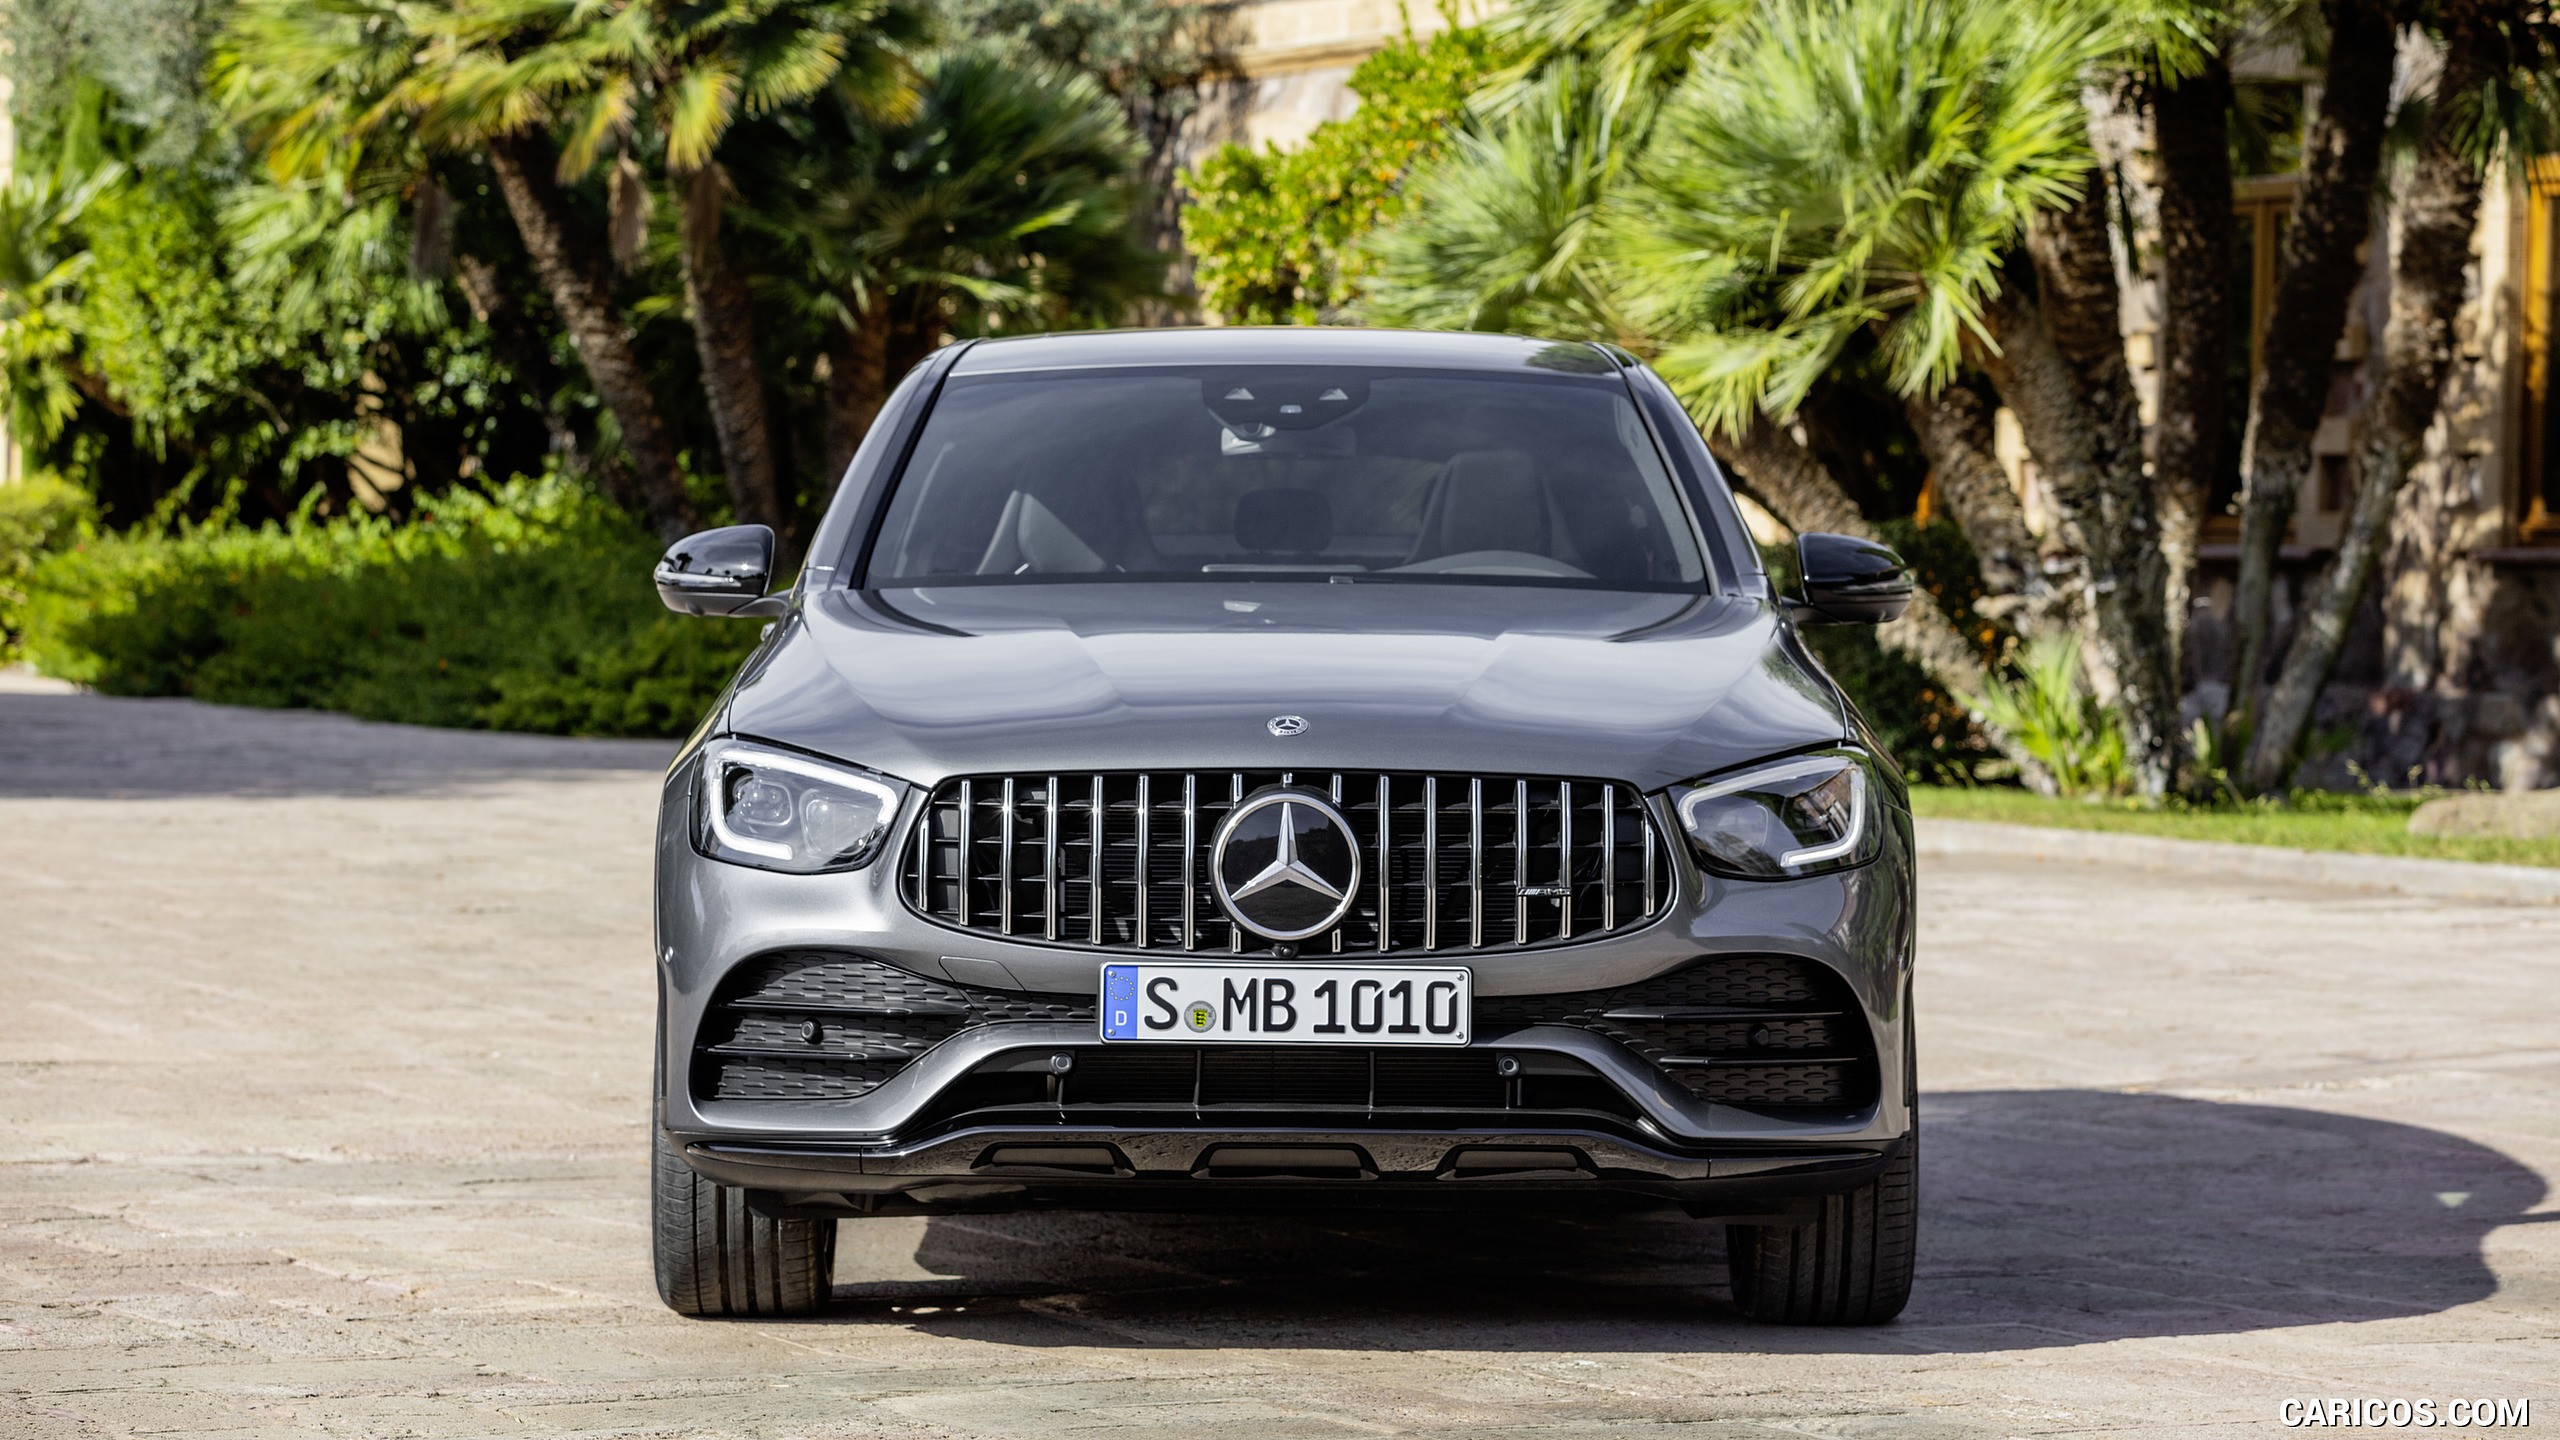 2020 Mercedes-AMG GLC 43 4MATIC Coupe - Front, #19 of 173